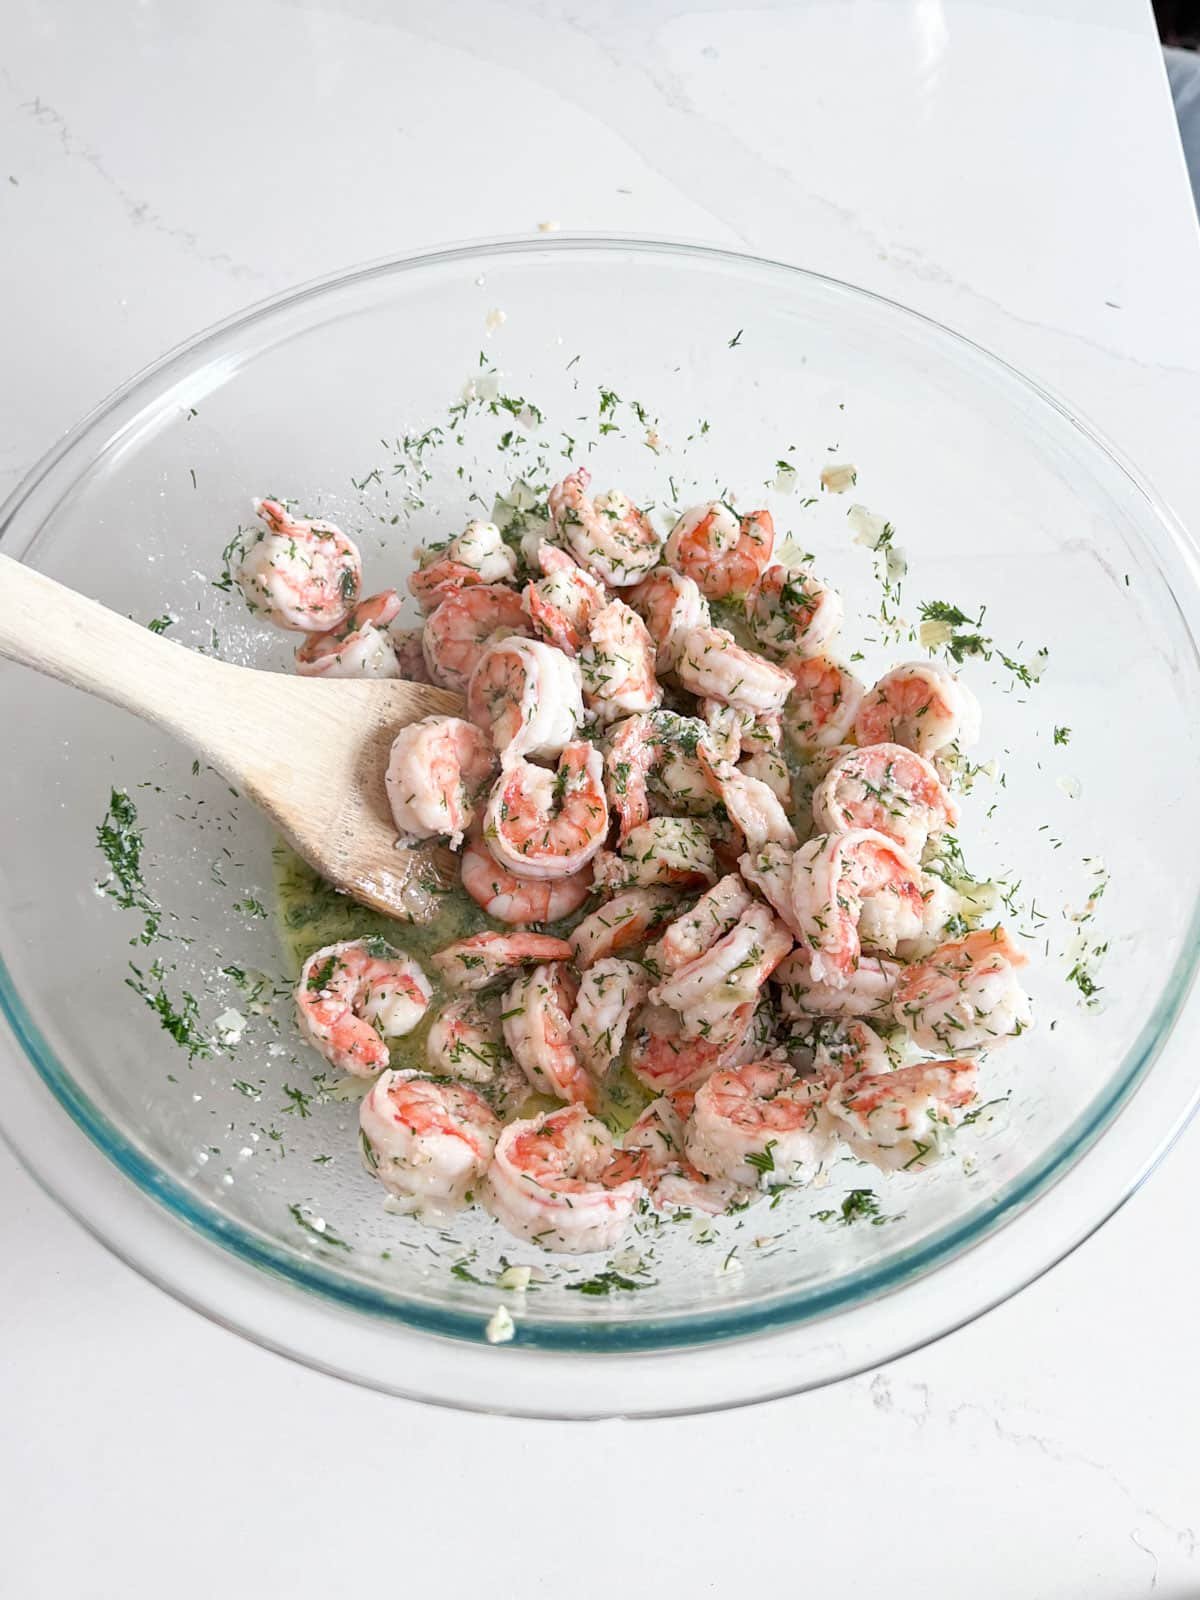 Shrimp in a glass bowl with dill and lemon juice on it being stirred with a wooden spoon.